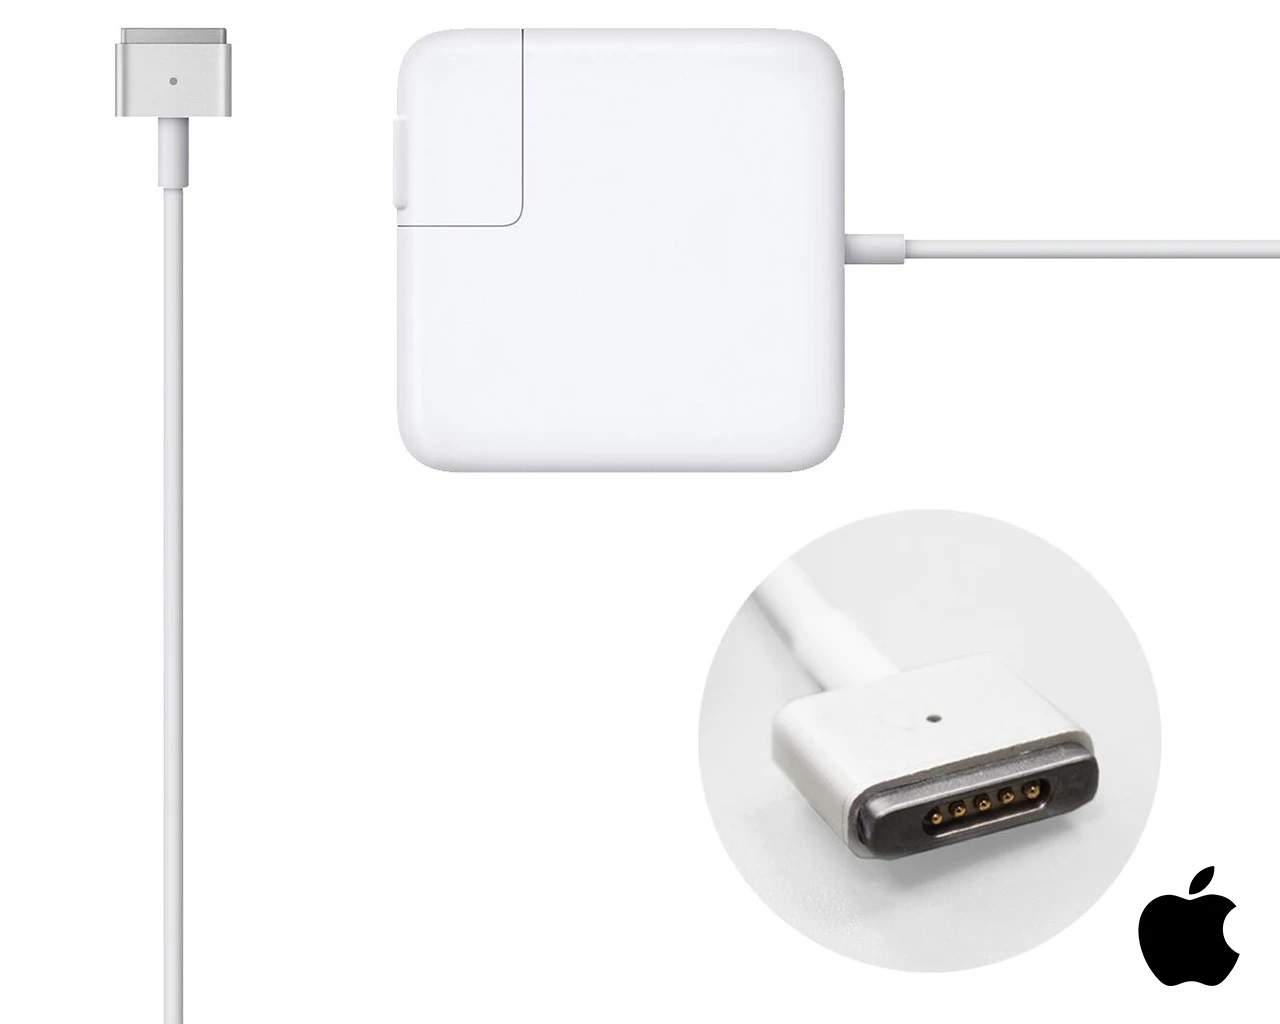 Accessories Energy - 60w charger for Macbook Magsafe 2